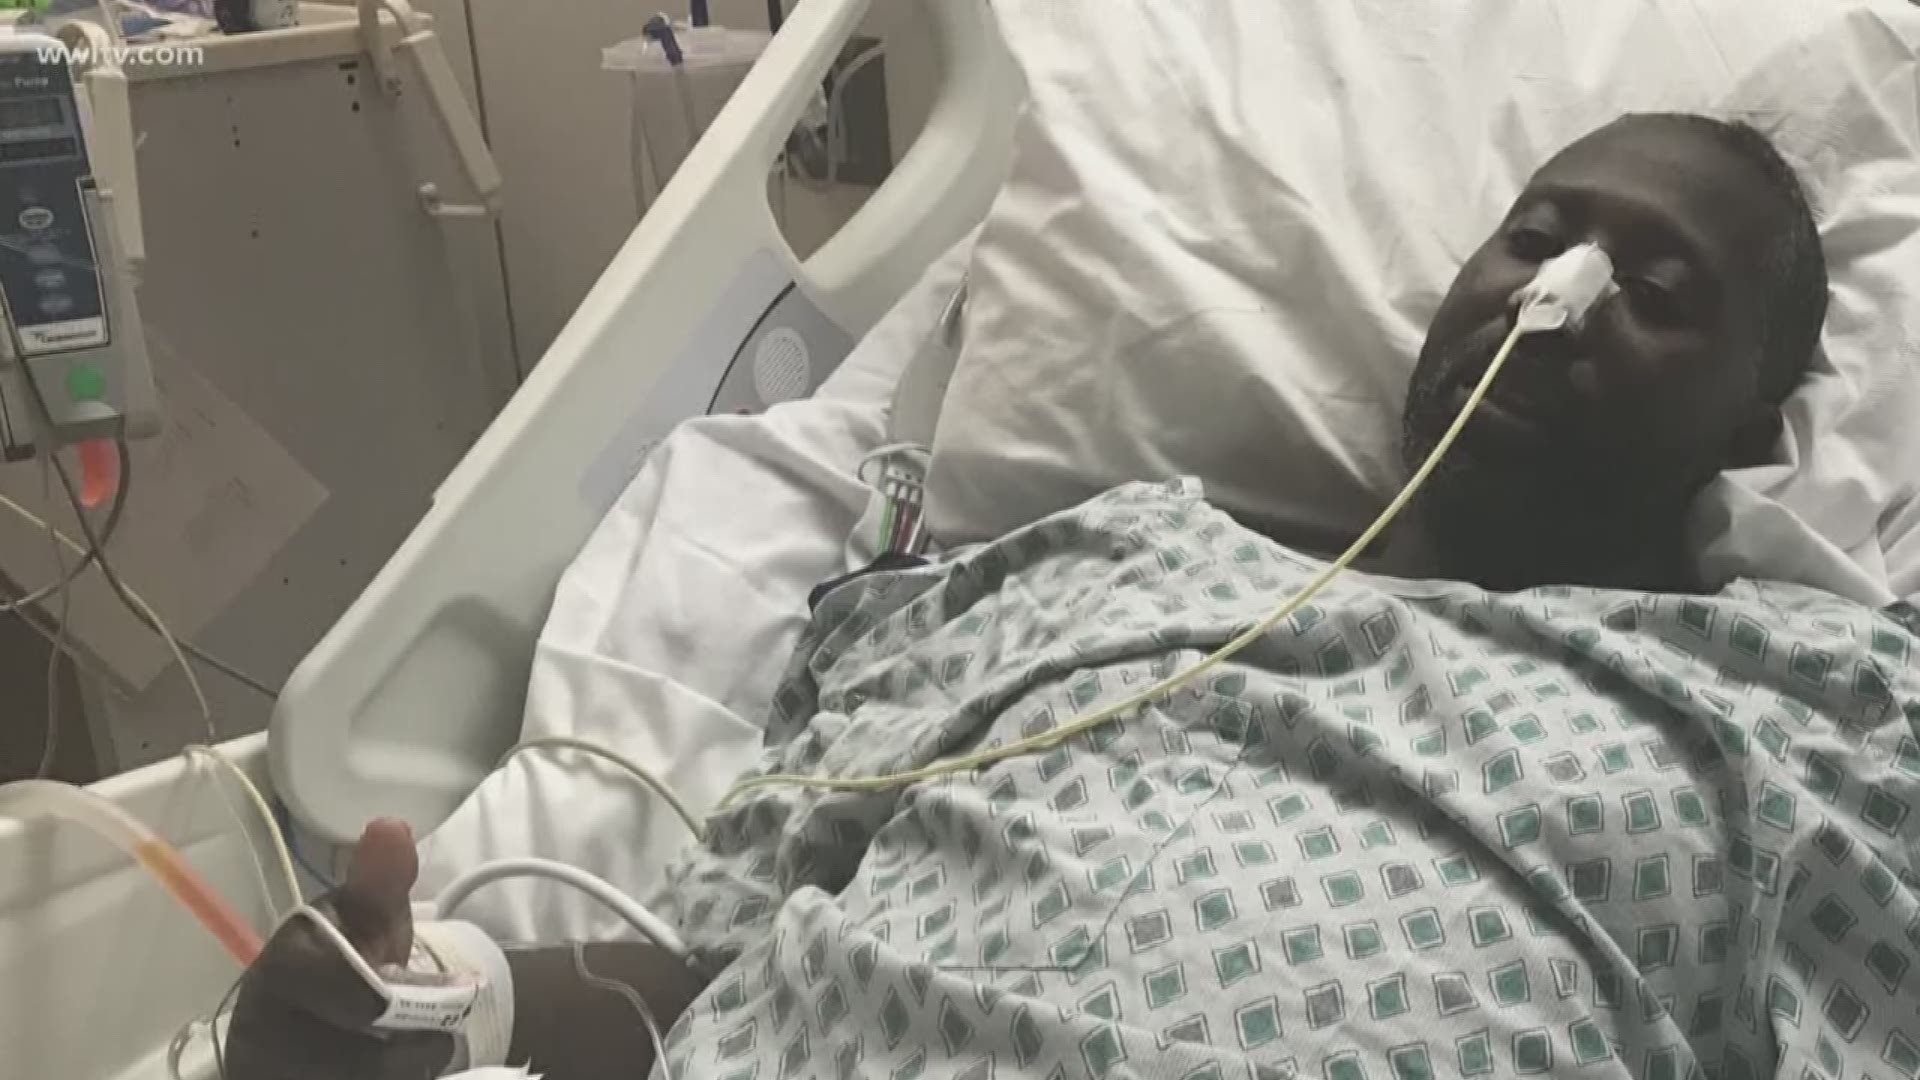 Ivan Toney was struck by a car and left on the side of the road last month. He's still in the hospital.